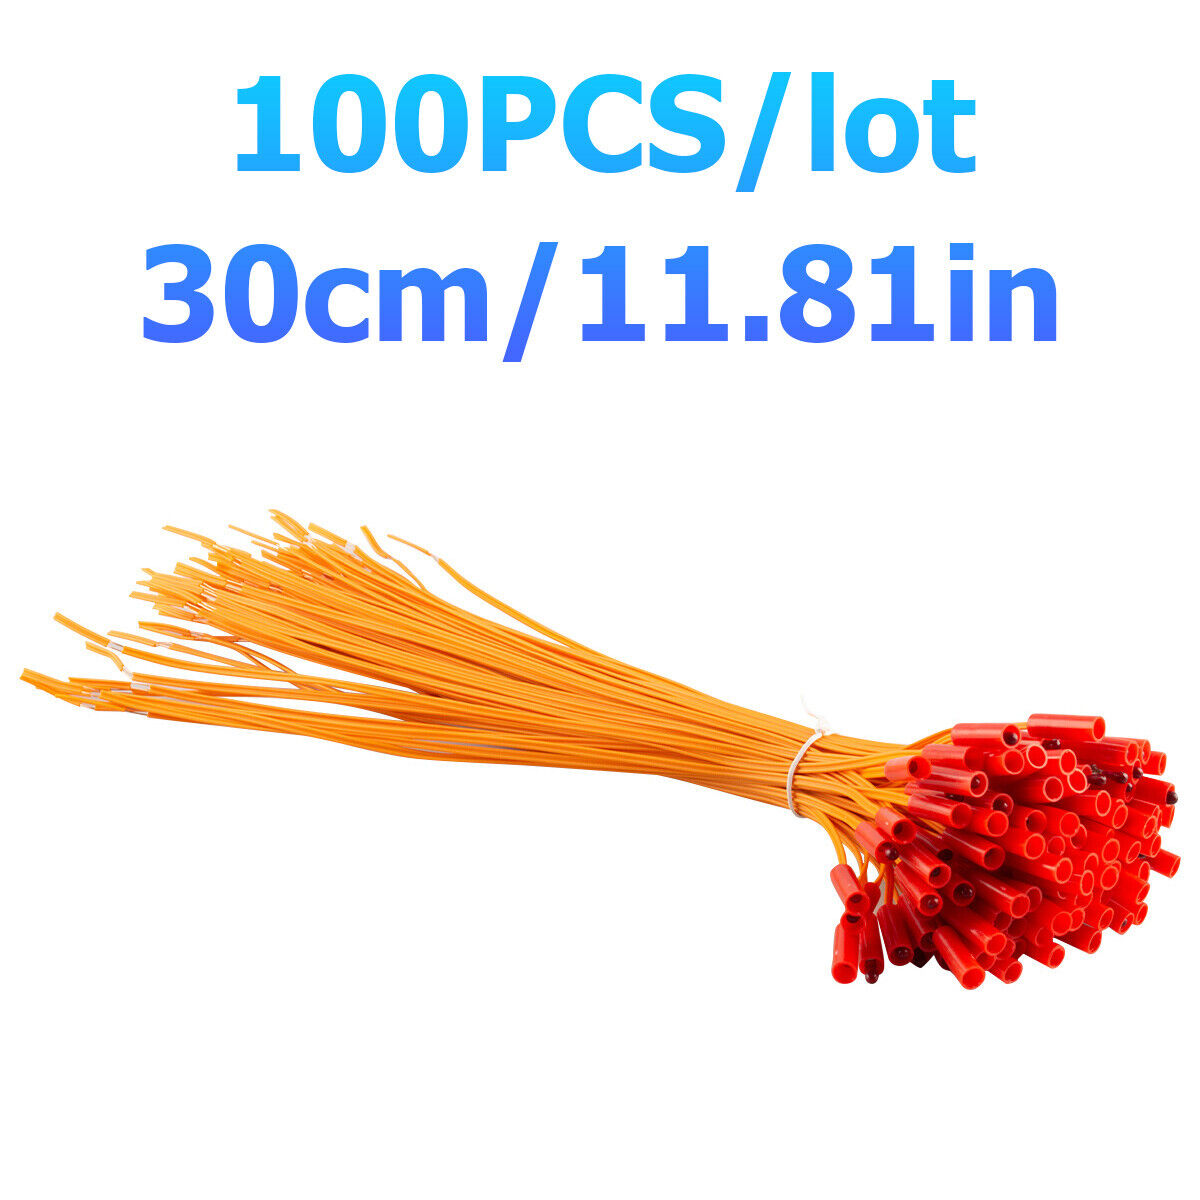 11.81in 100pcs/lot copper Remote Firework Firing system connect wire orange line